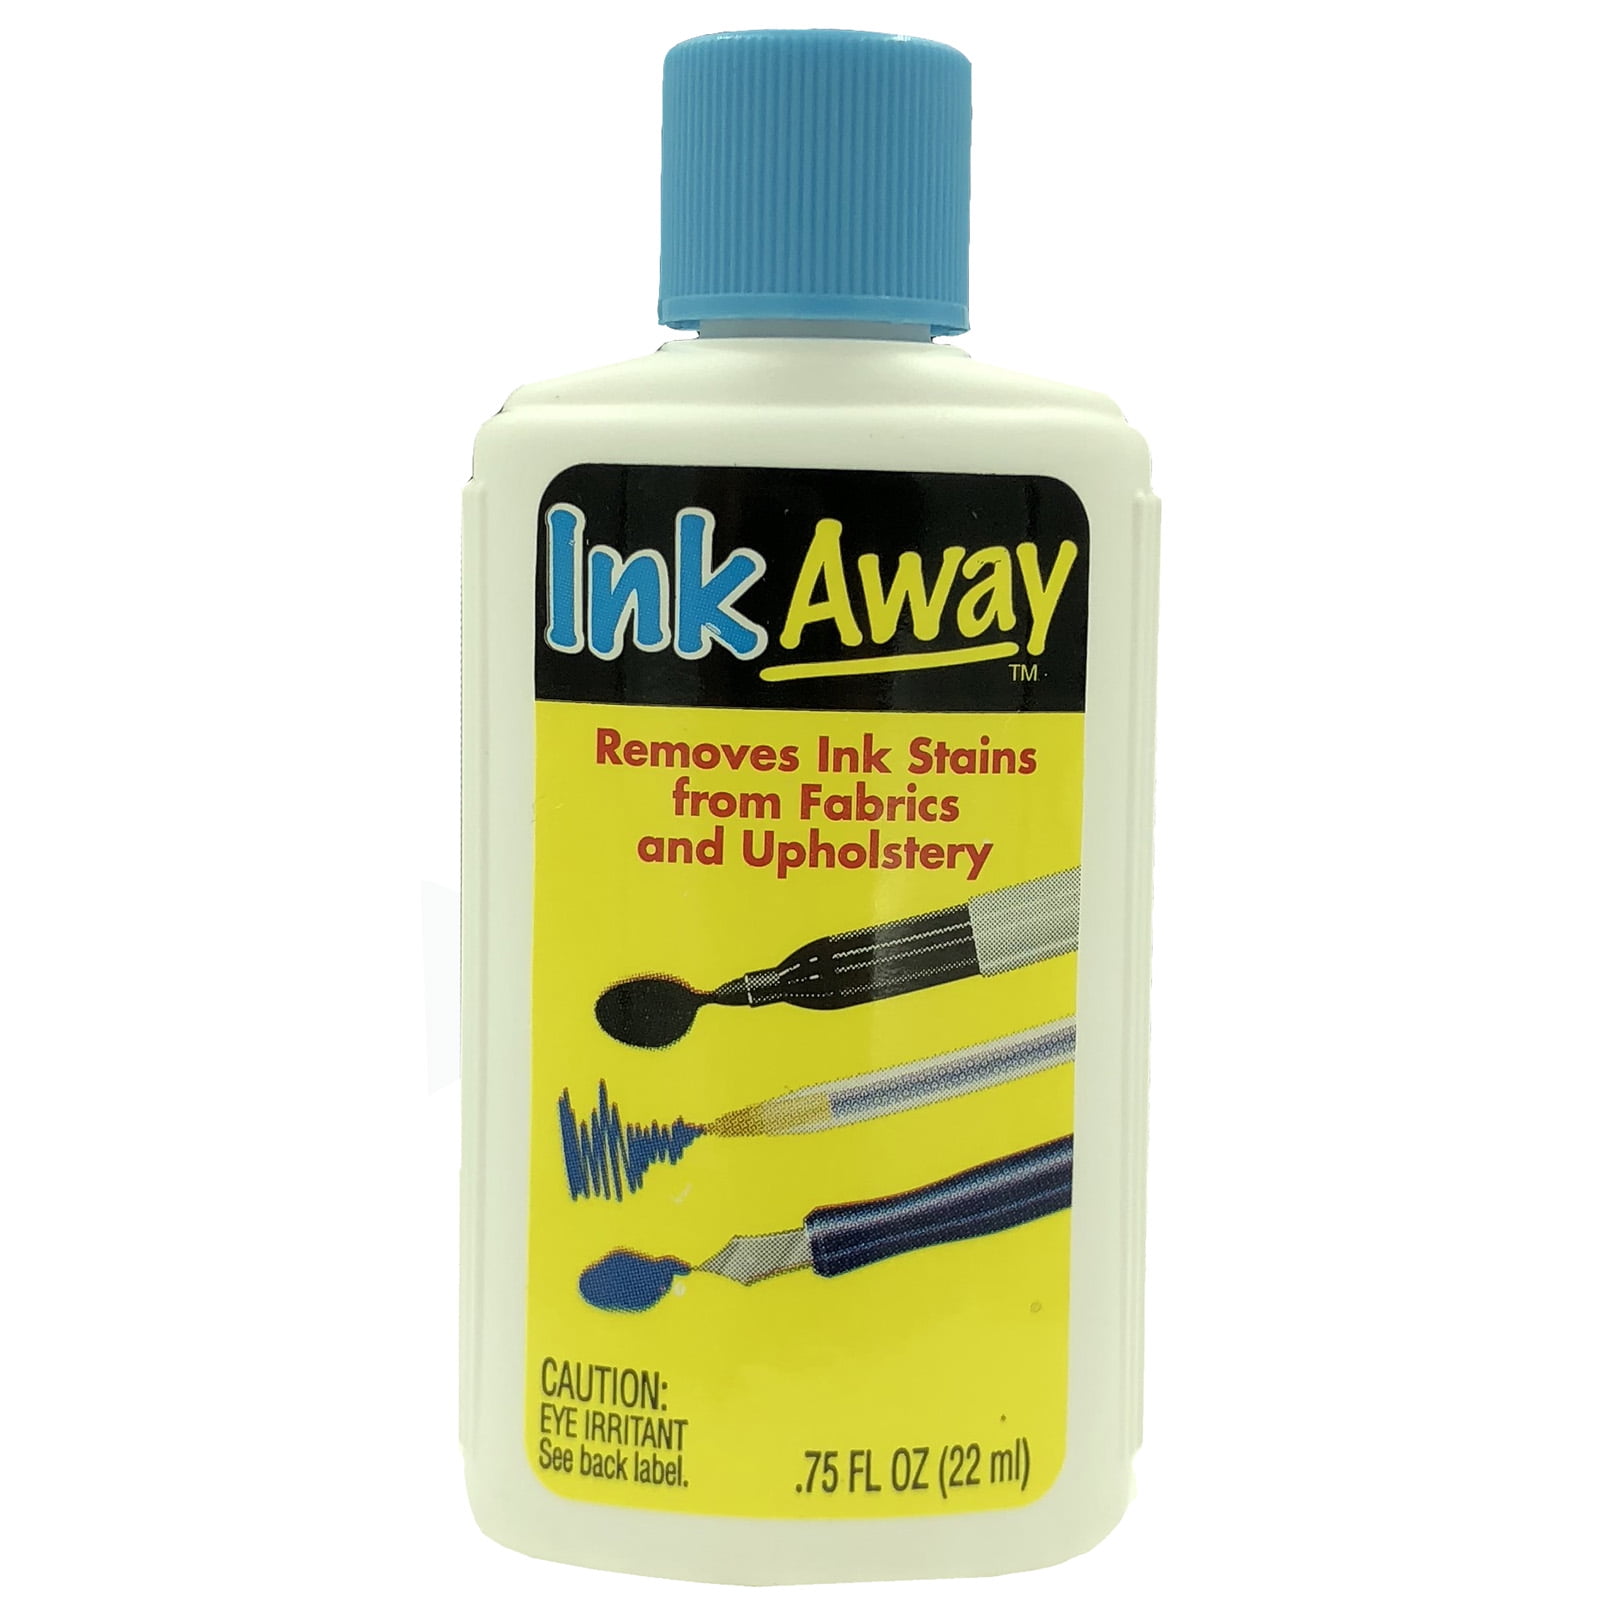 TetraClean Pen Ink Remover/Ink Stain Remover/Ink Remover Liquid/Marker  Stain Remover - To Remove Stain from Carpet, Upholstry, Clothing, Wall,  Plastic and more in Spray Bottle 500ml Stain Remover Price in India 